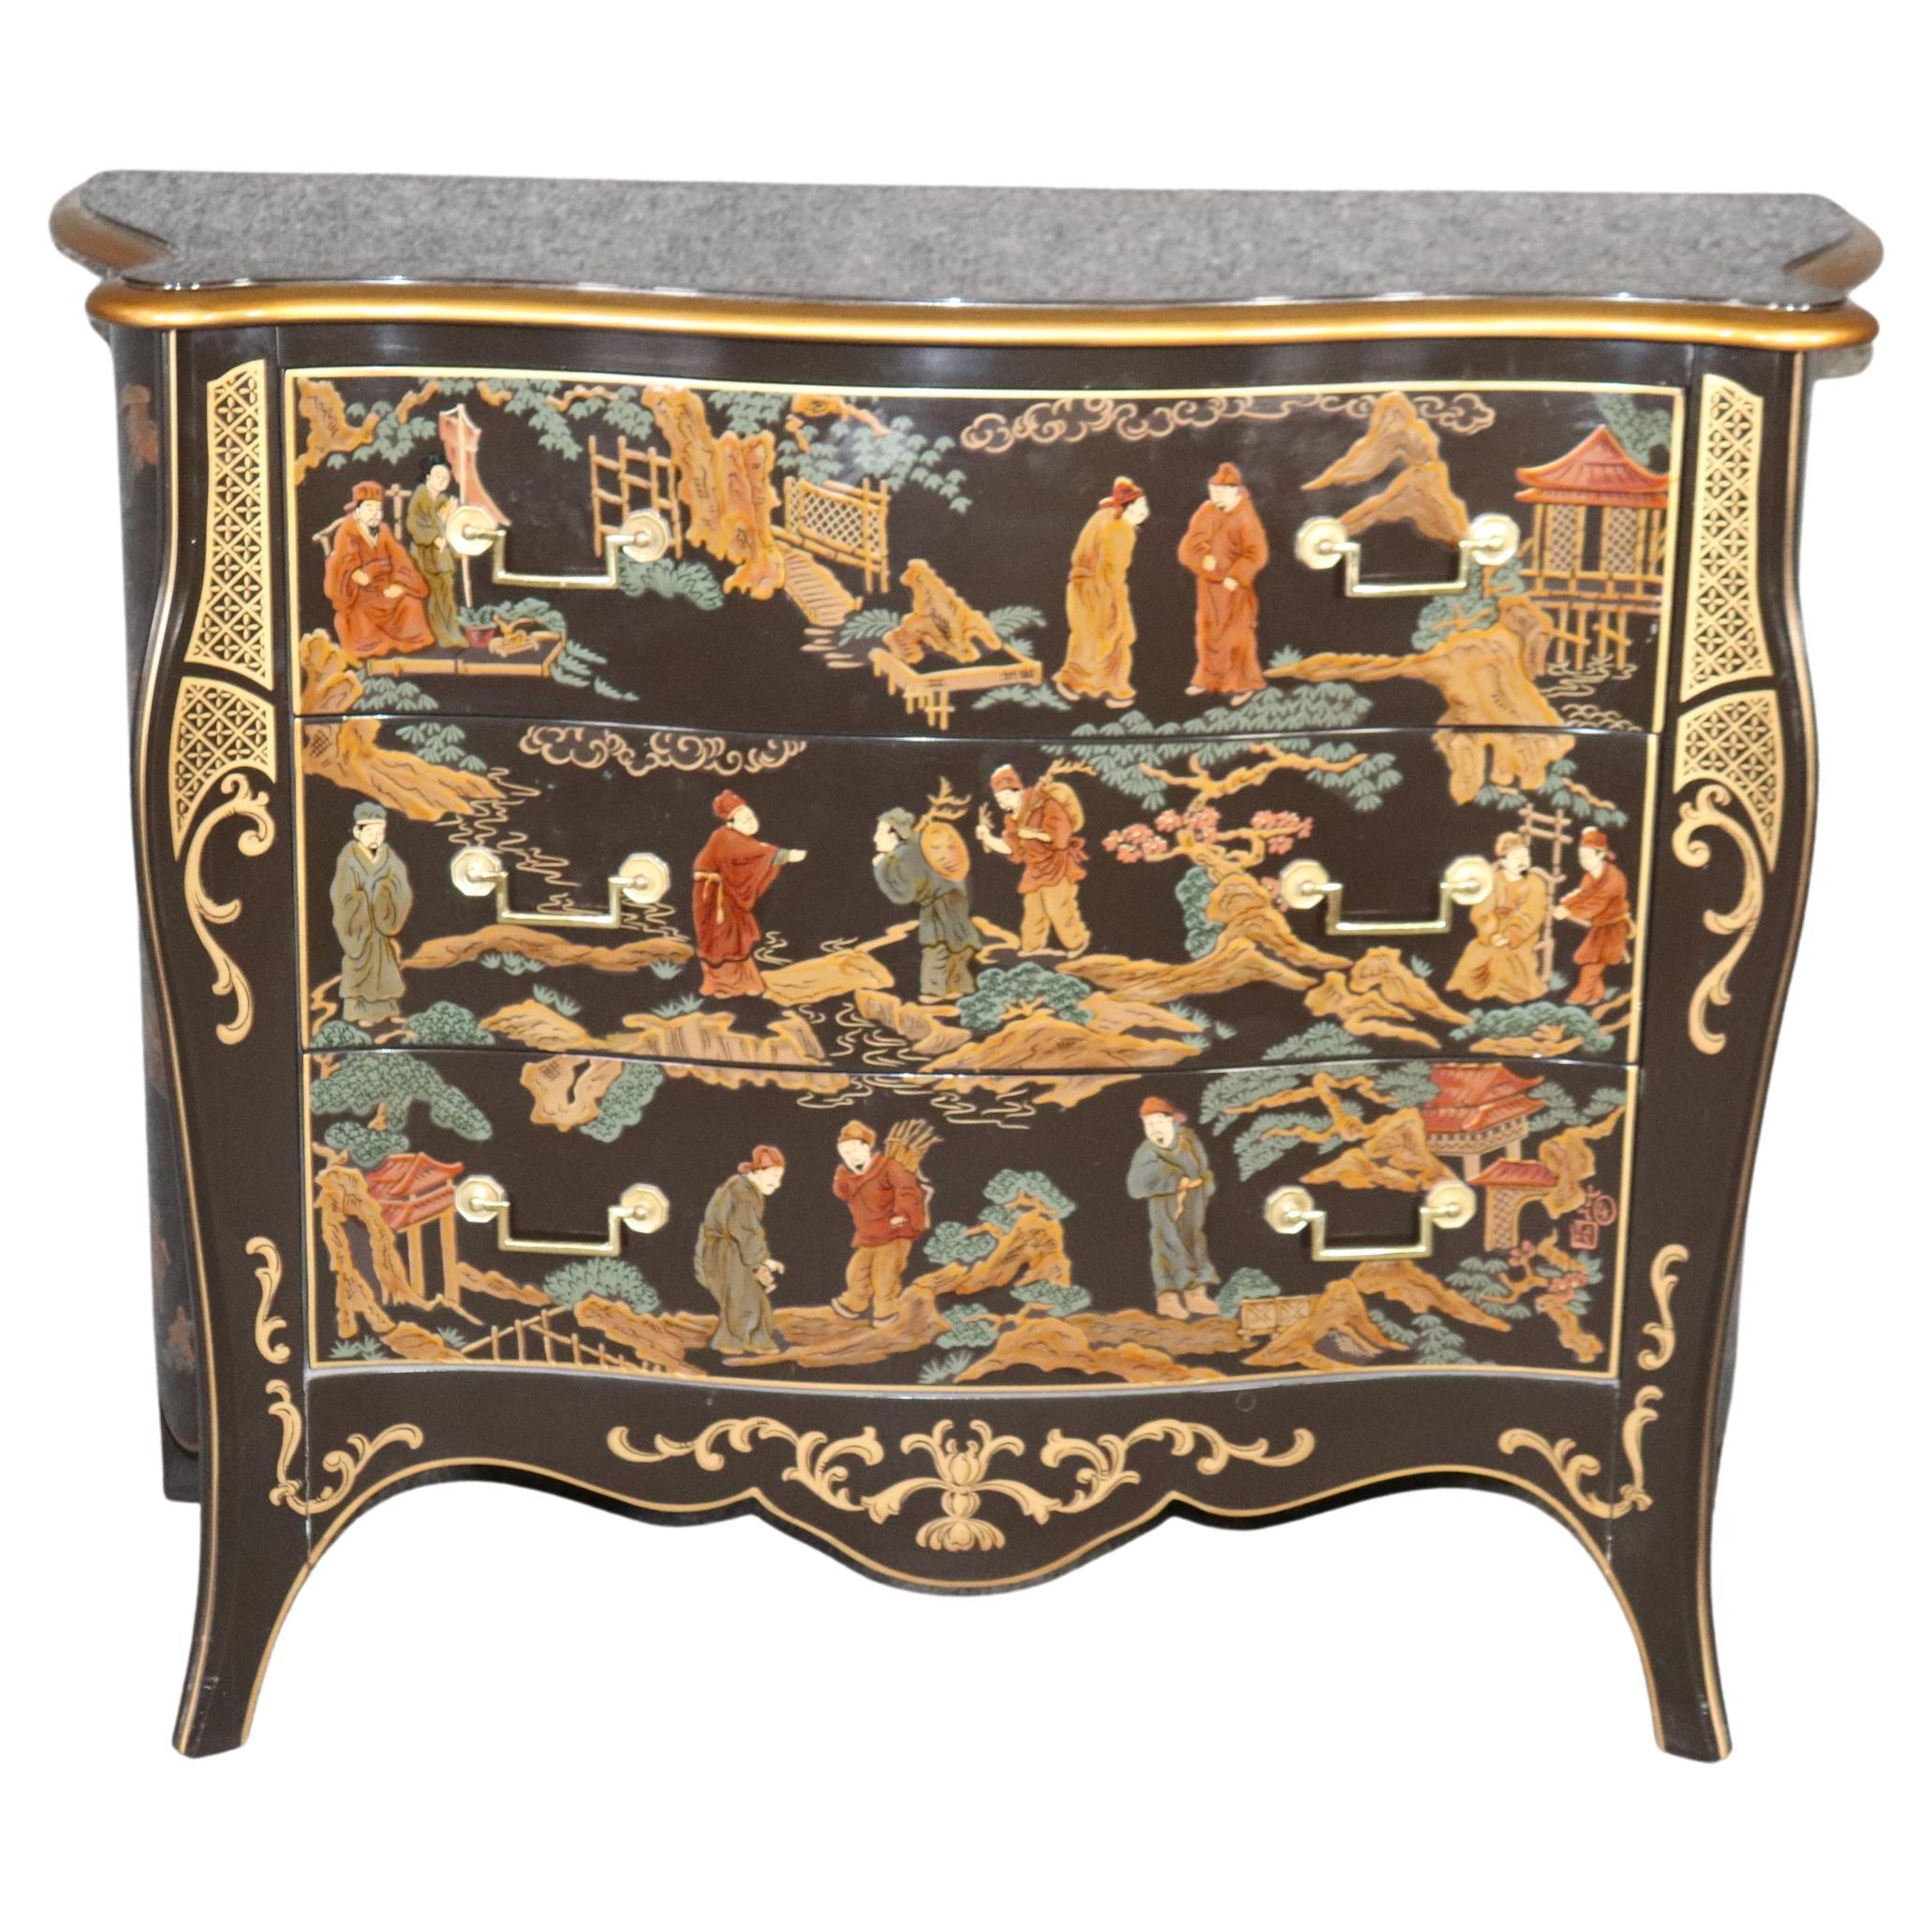 Gorgeous Hand-Paint Decorated Chinoiserie Lacquered Commode by Drexel circa 1990